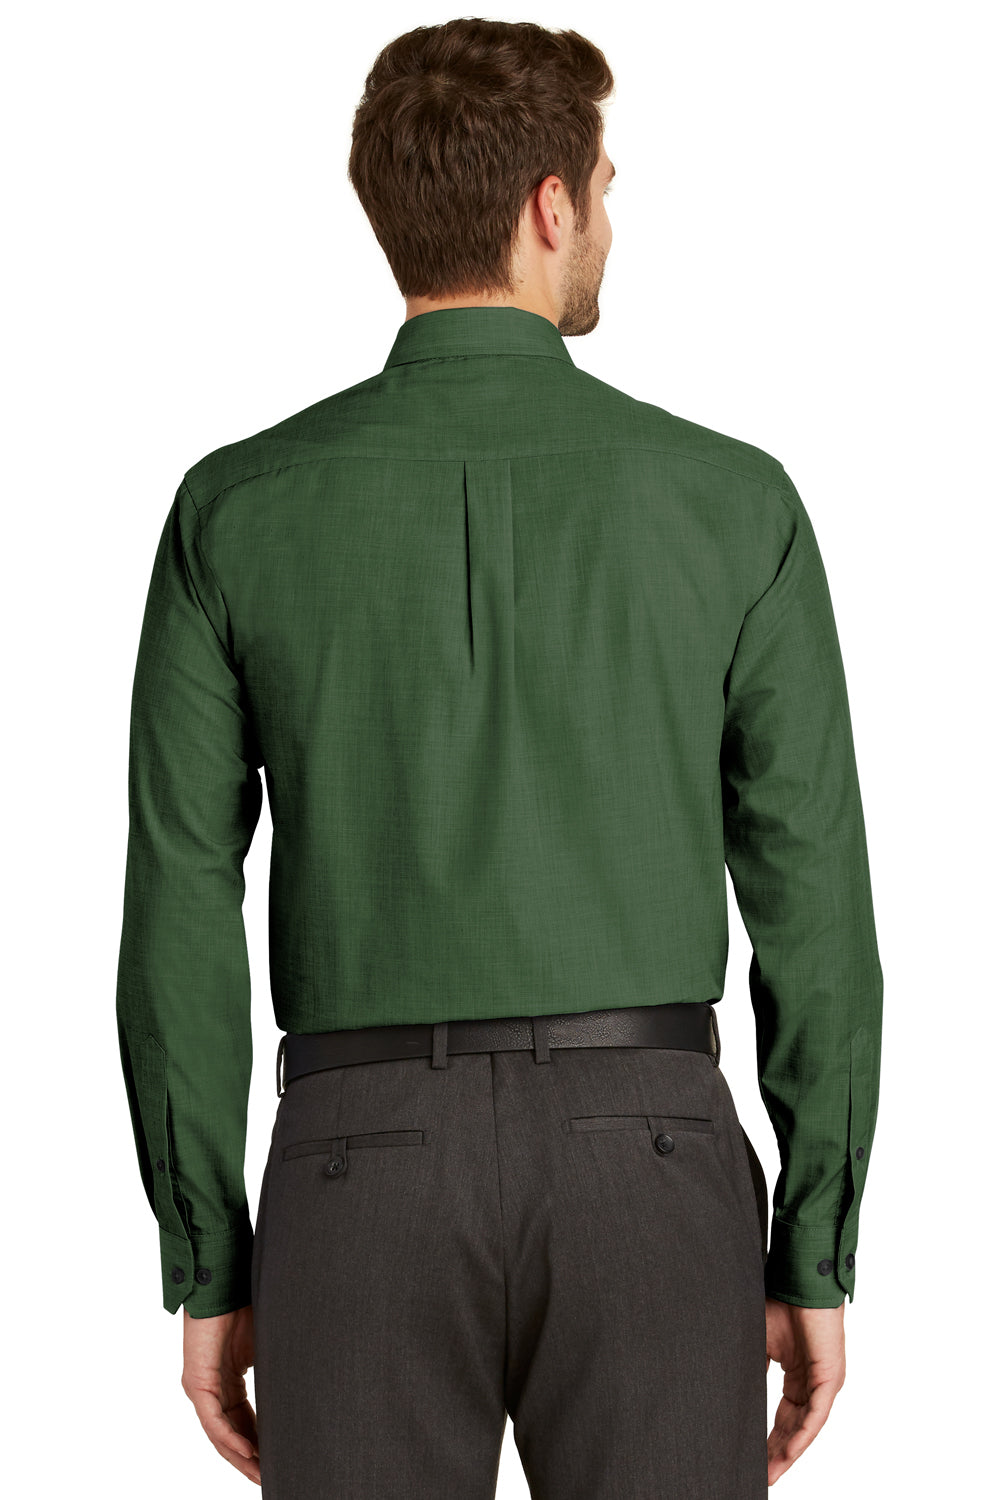 Port Authority S640 Mens Easy Care Wrinkle Resistant Long Sleeve Button Down Shirt w/ Pocket Dark Cactus Green Back